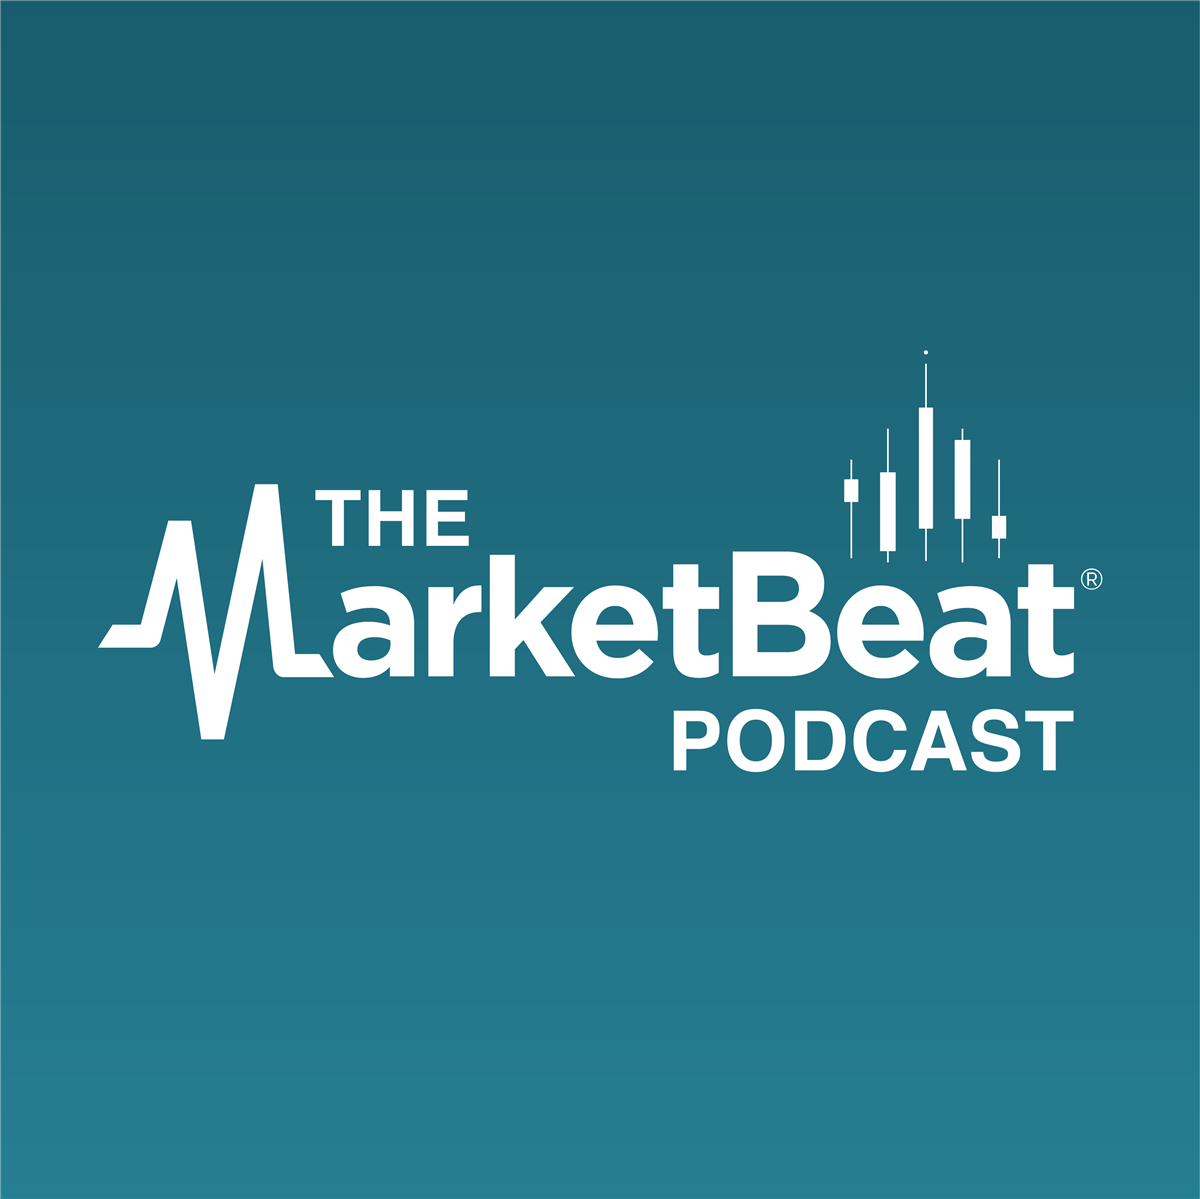 MarketBeat Podcast: ESG, Why Going Green Can Mean Big Growth